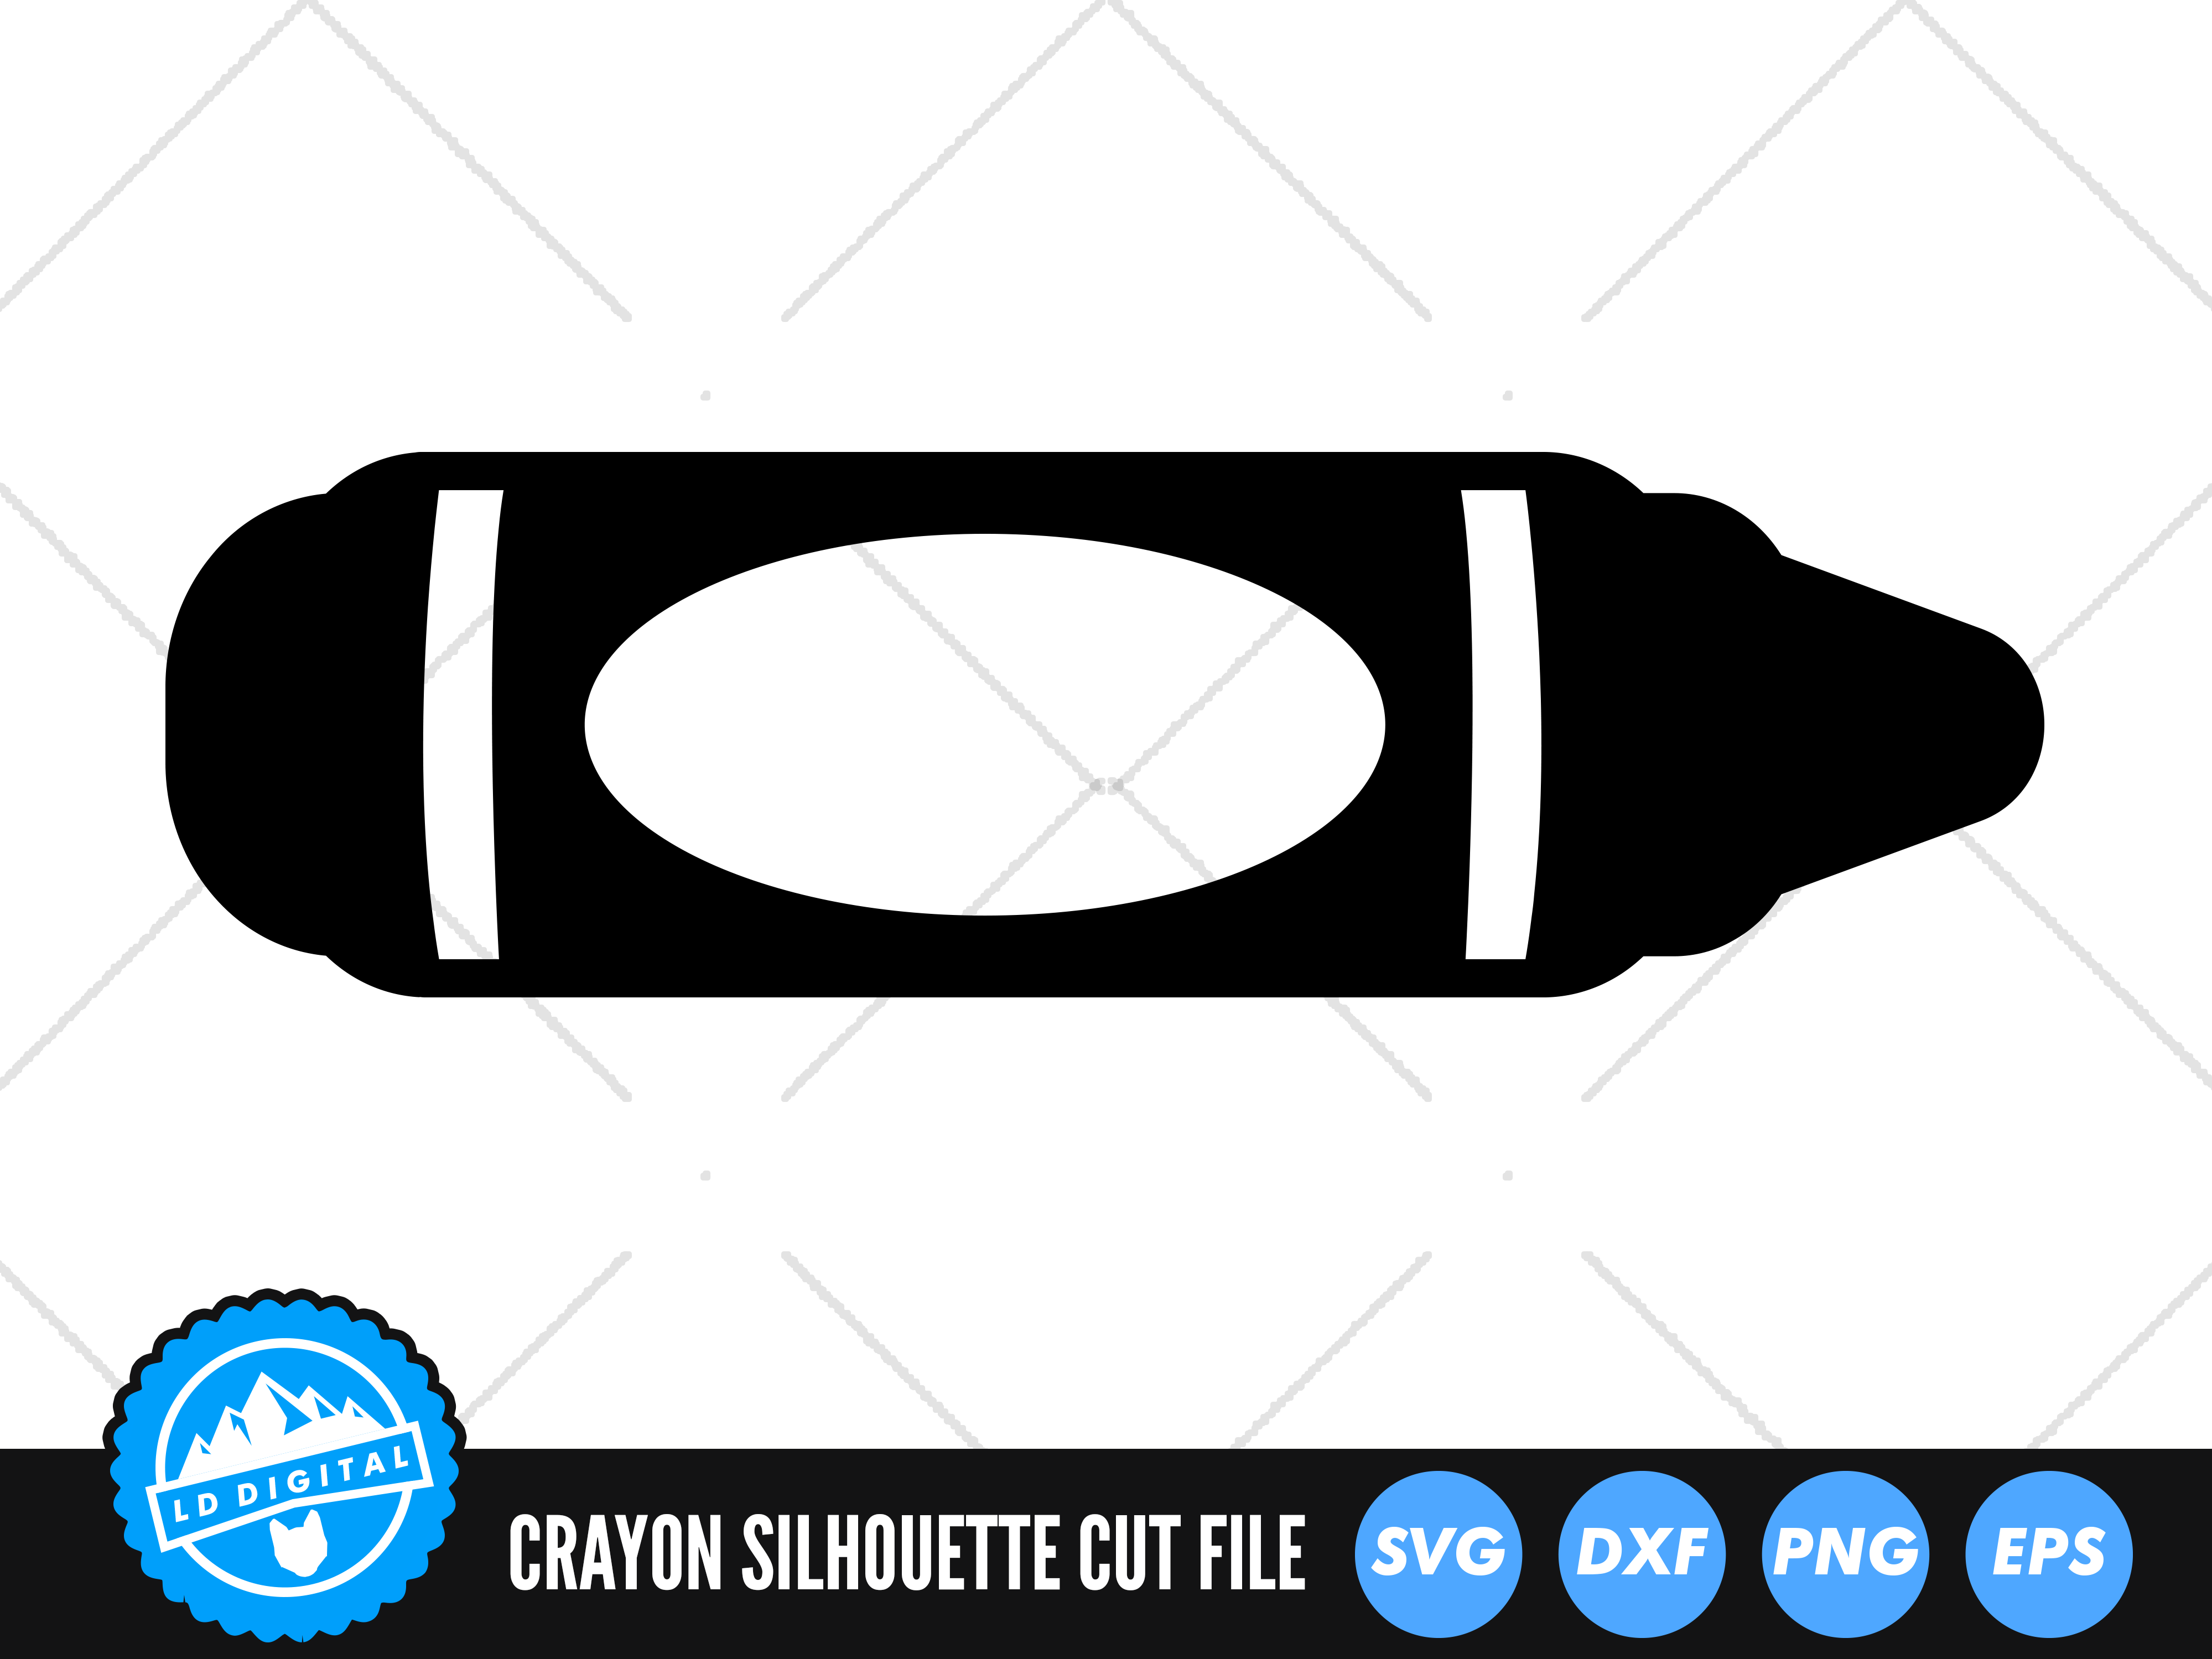 Box of Crayons Cuttable SVG Files for Silhouette, Cricut Cutting Machines